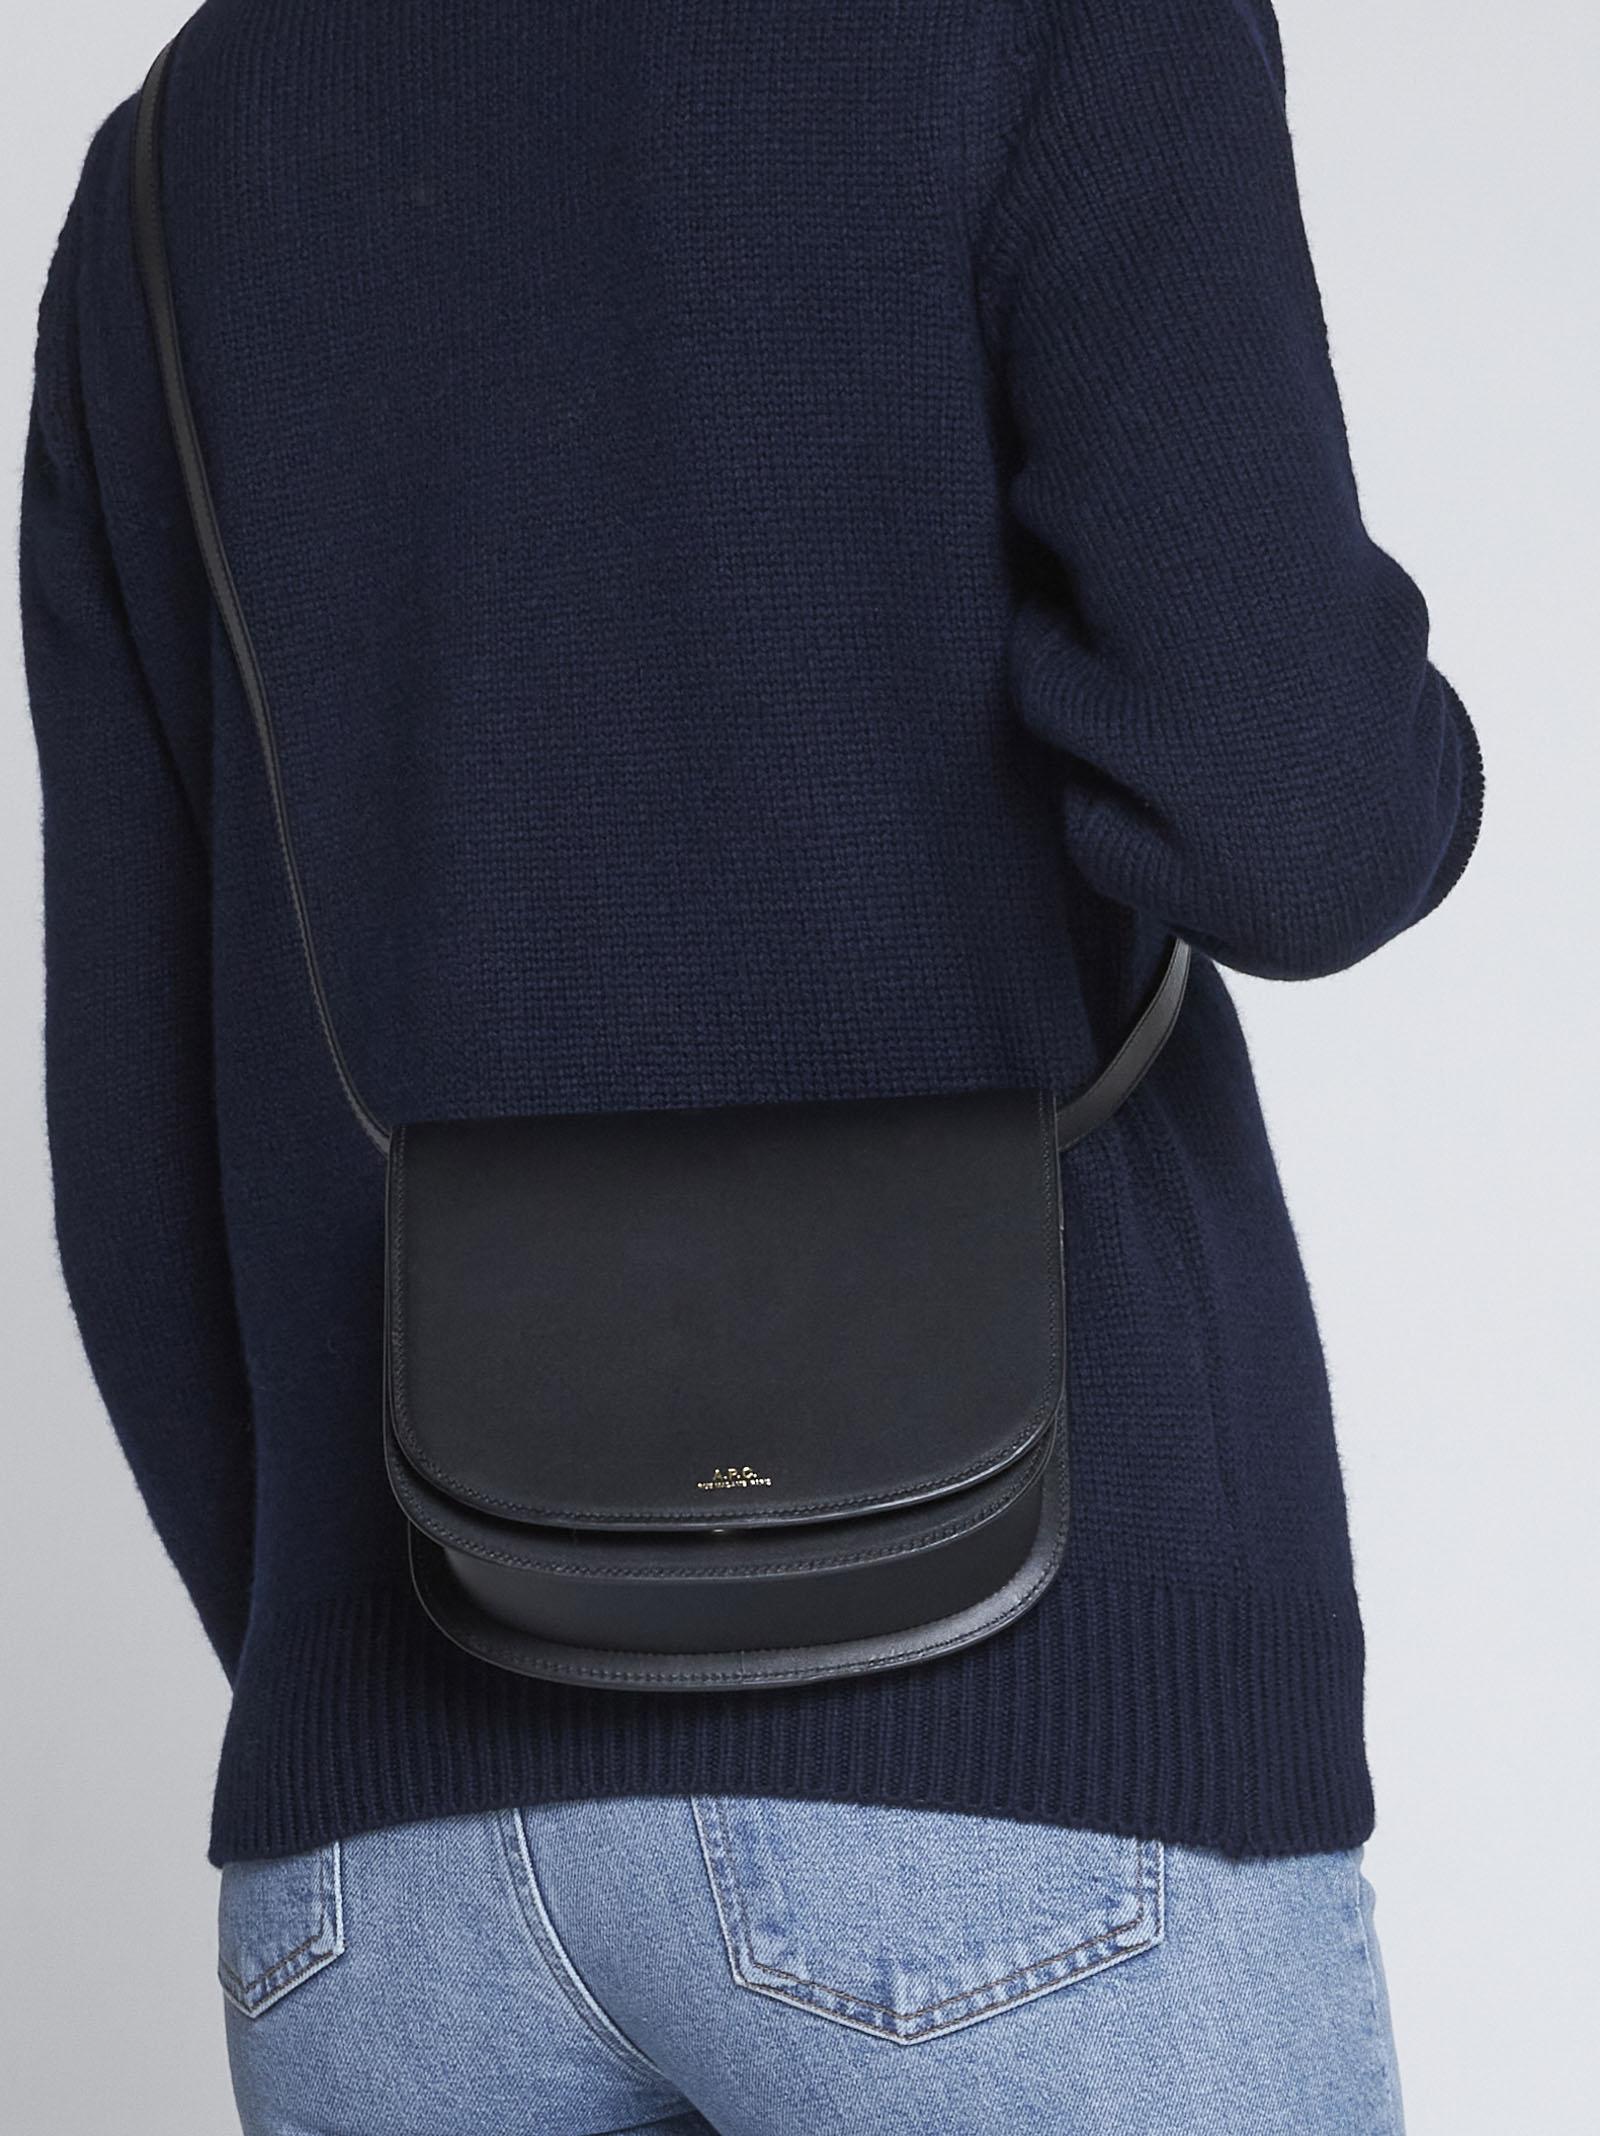 A.P.C. Dina Leather Bag in Black | Lyst